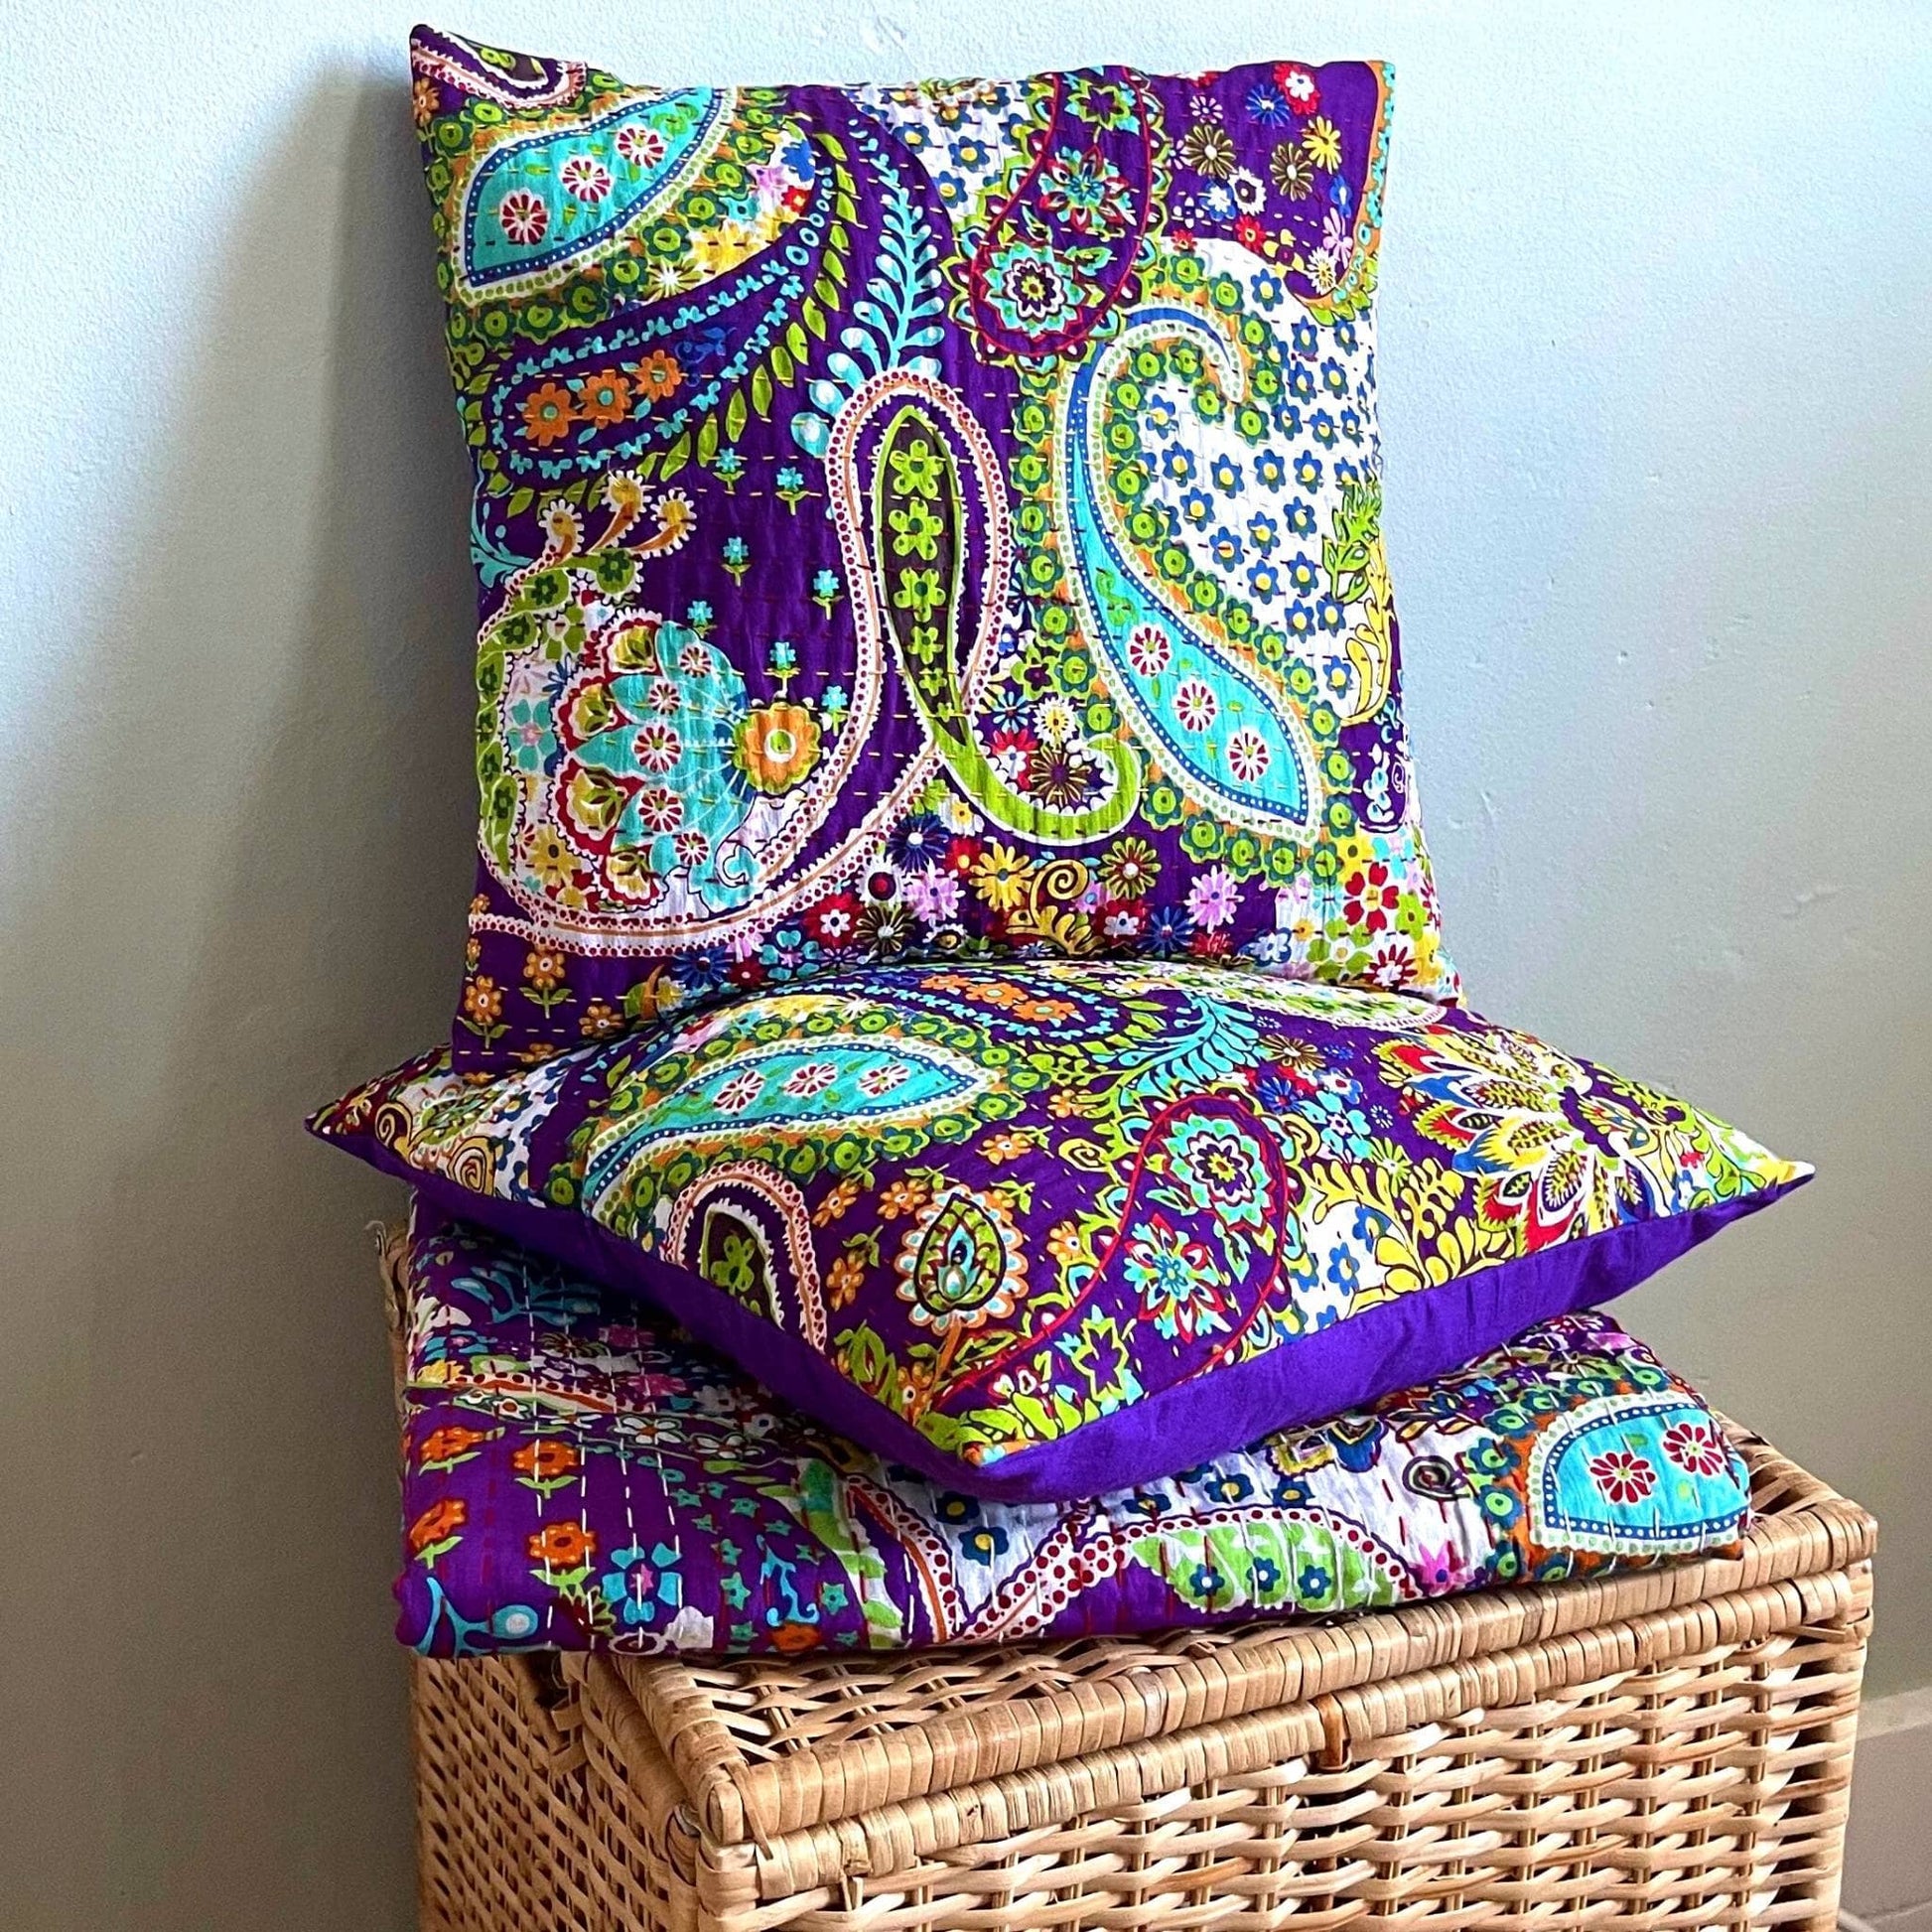 Two purple kantha pillow covers sitting on a matching quilt on a wooden hamper in front of a light blue wall.